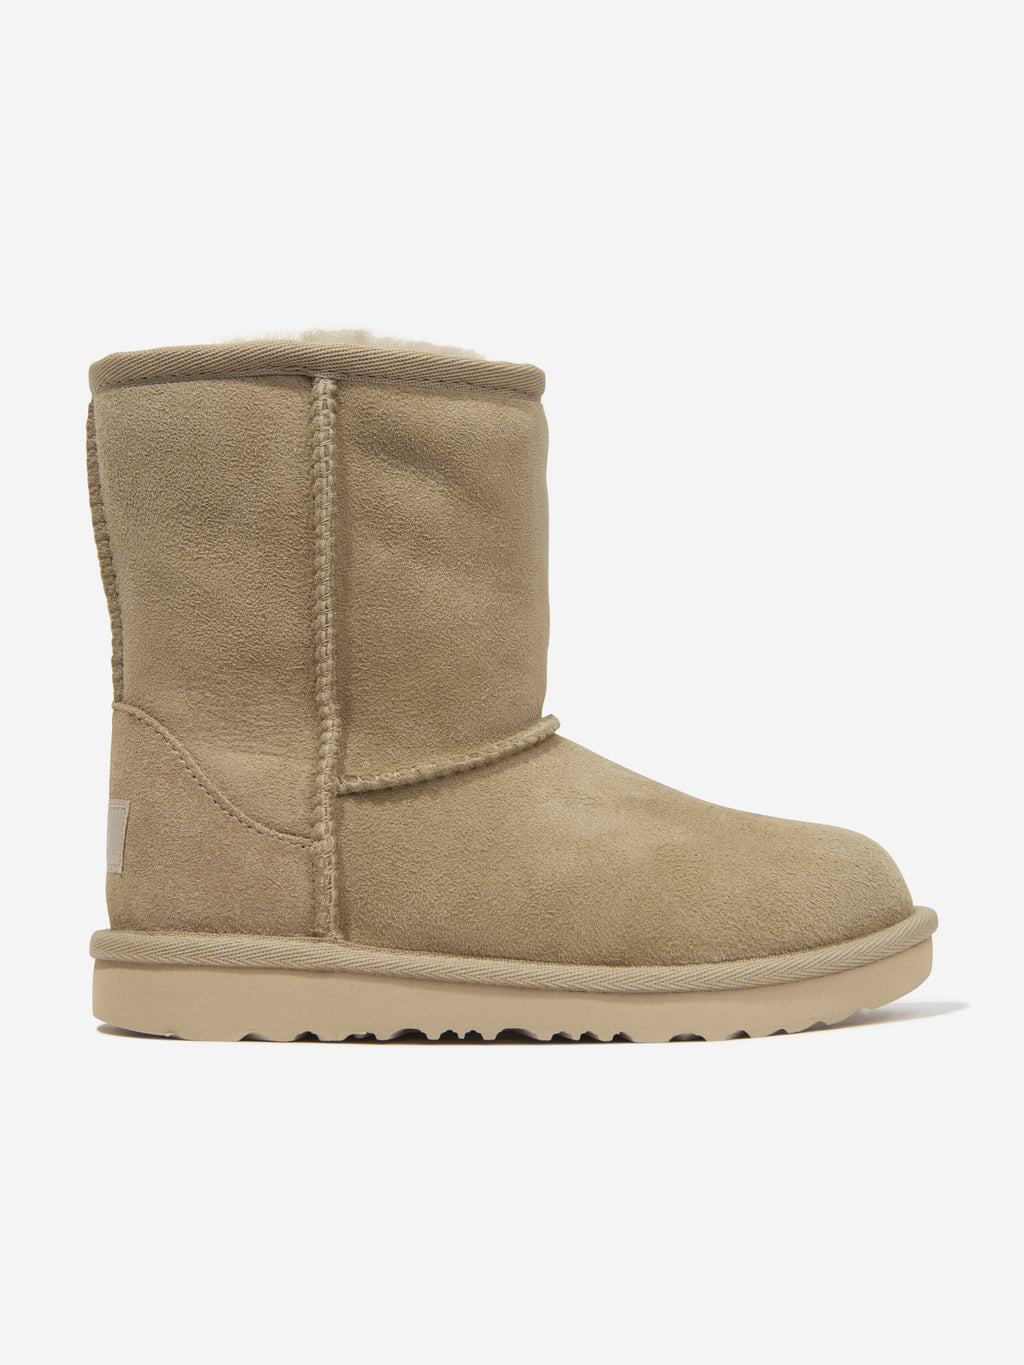 UGG Teen Classic Mini II Suede Leather Boots Unisex Kids USA 3 / UK 2 Brown by Childrensalon